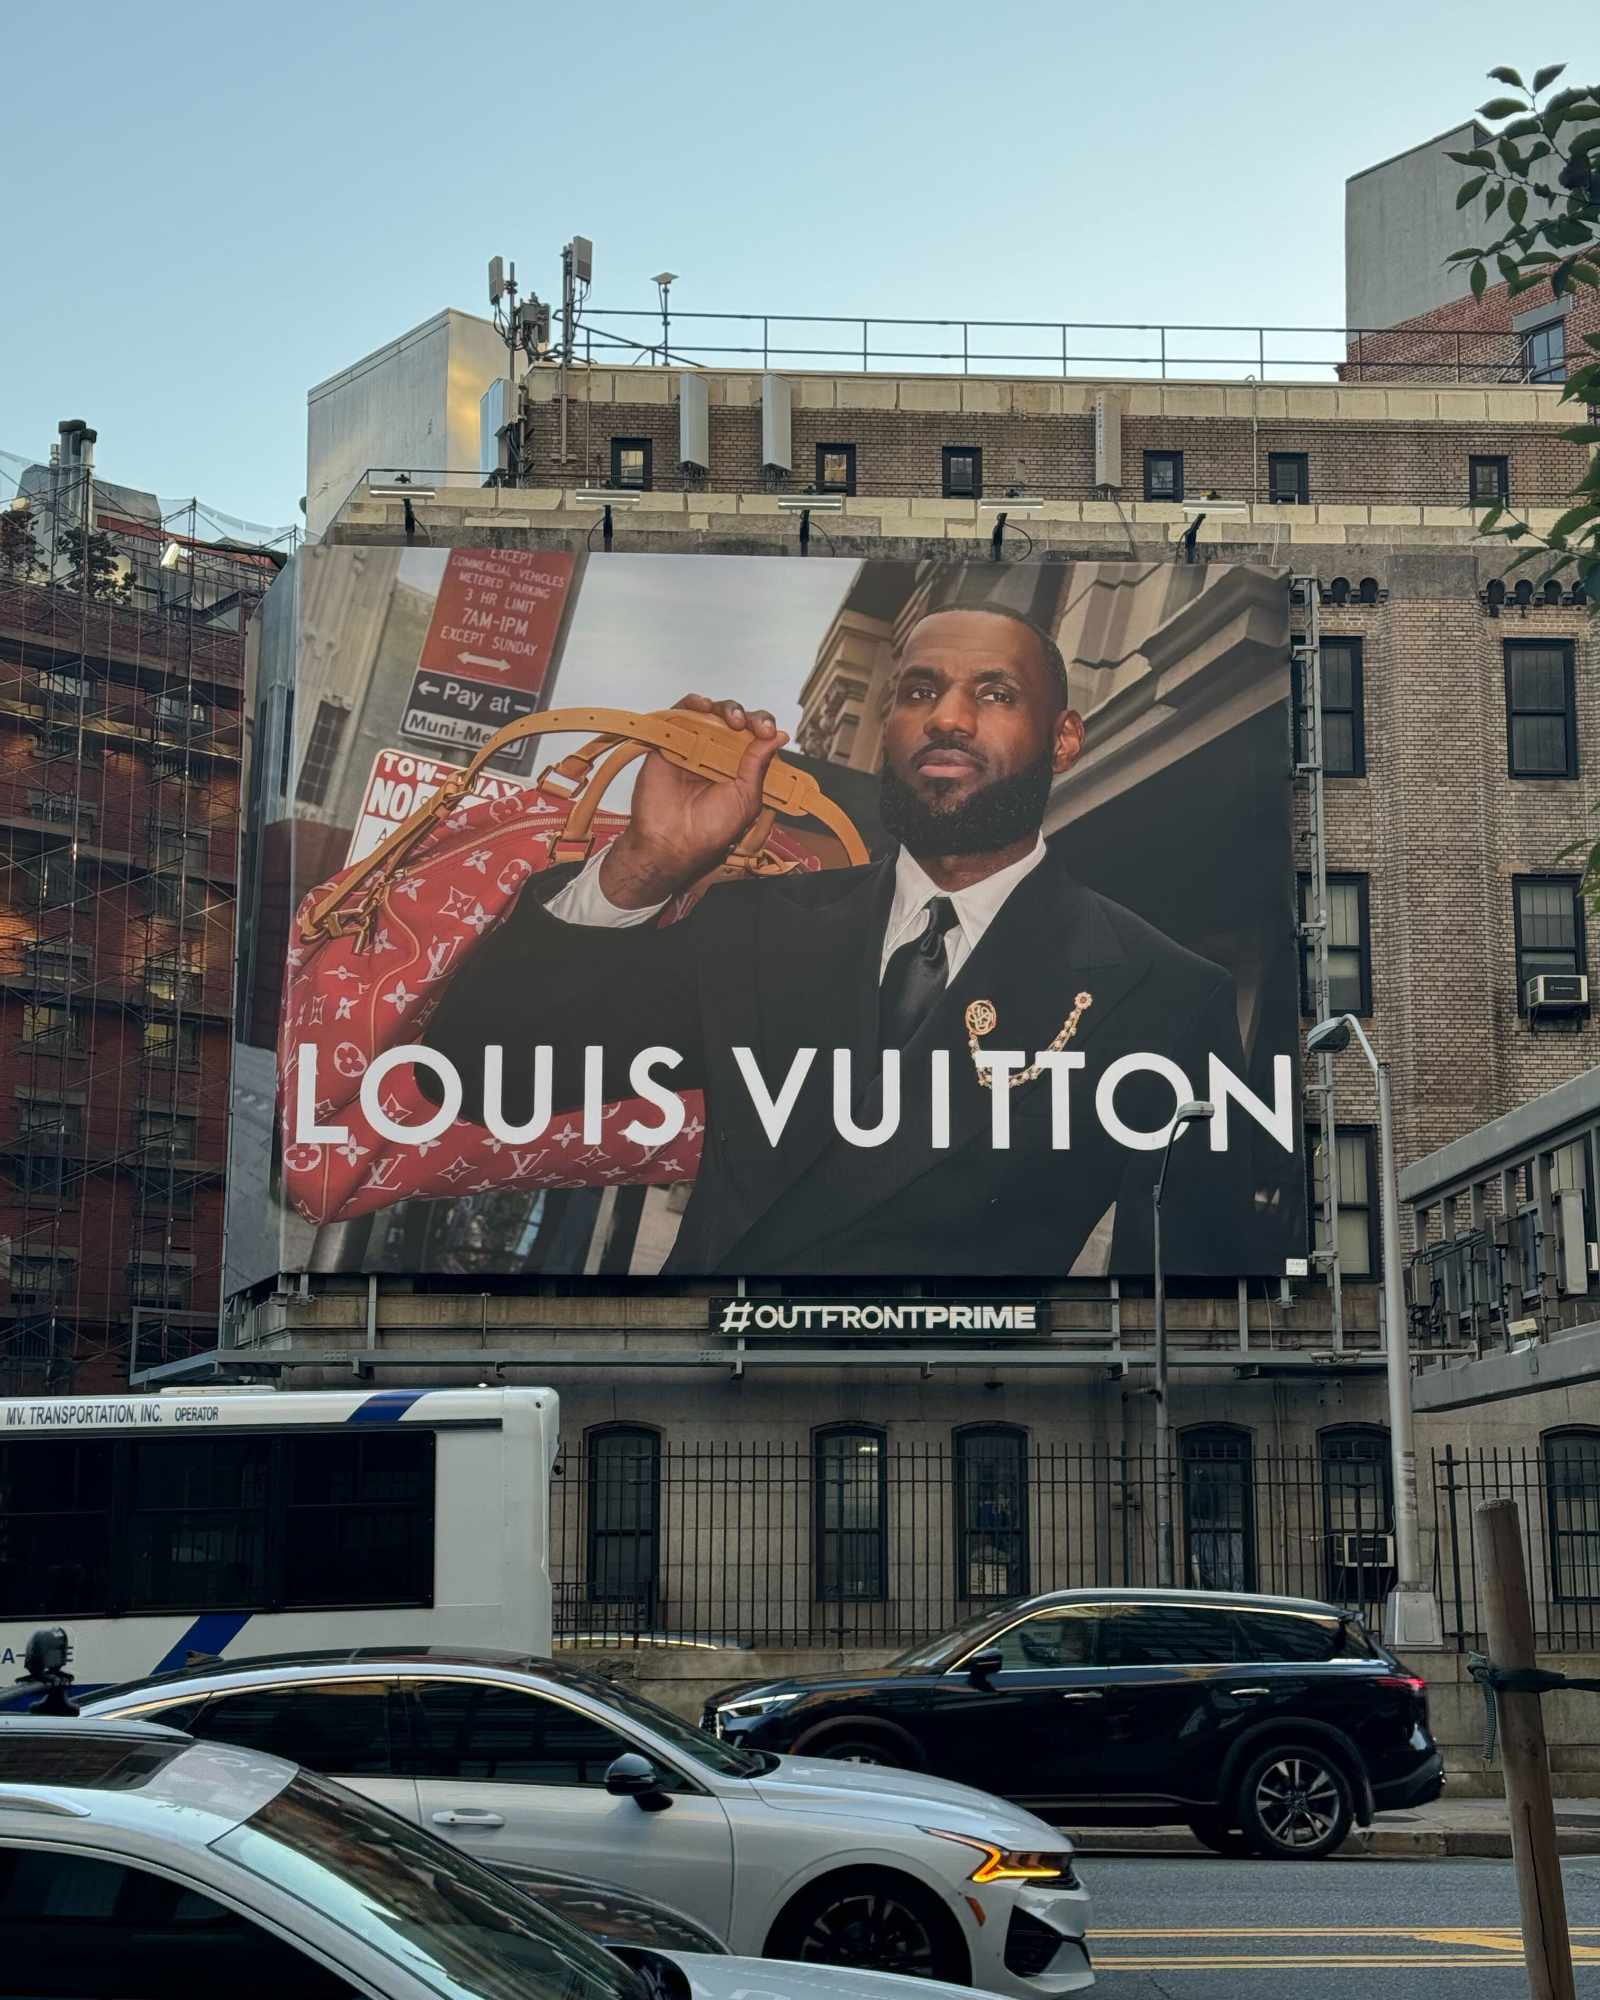 LeBron James Is Pharrell's New Louis Vuitton Cover Star